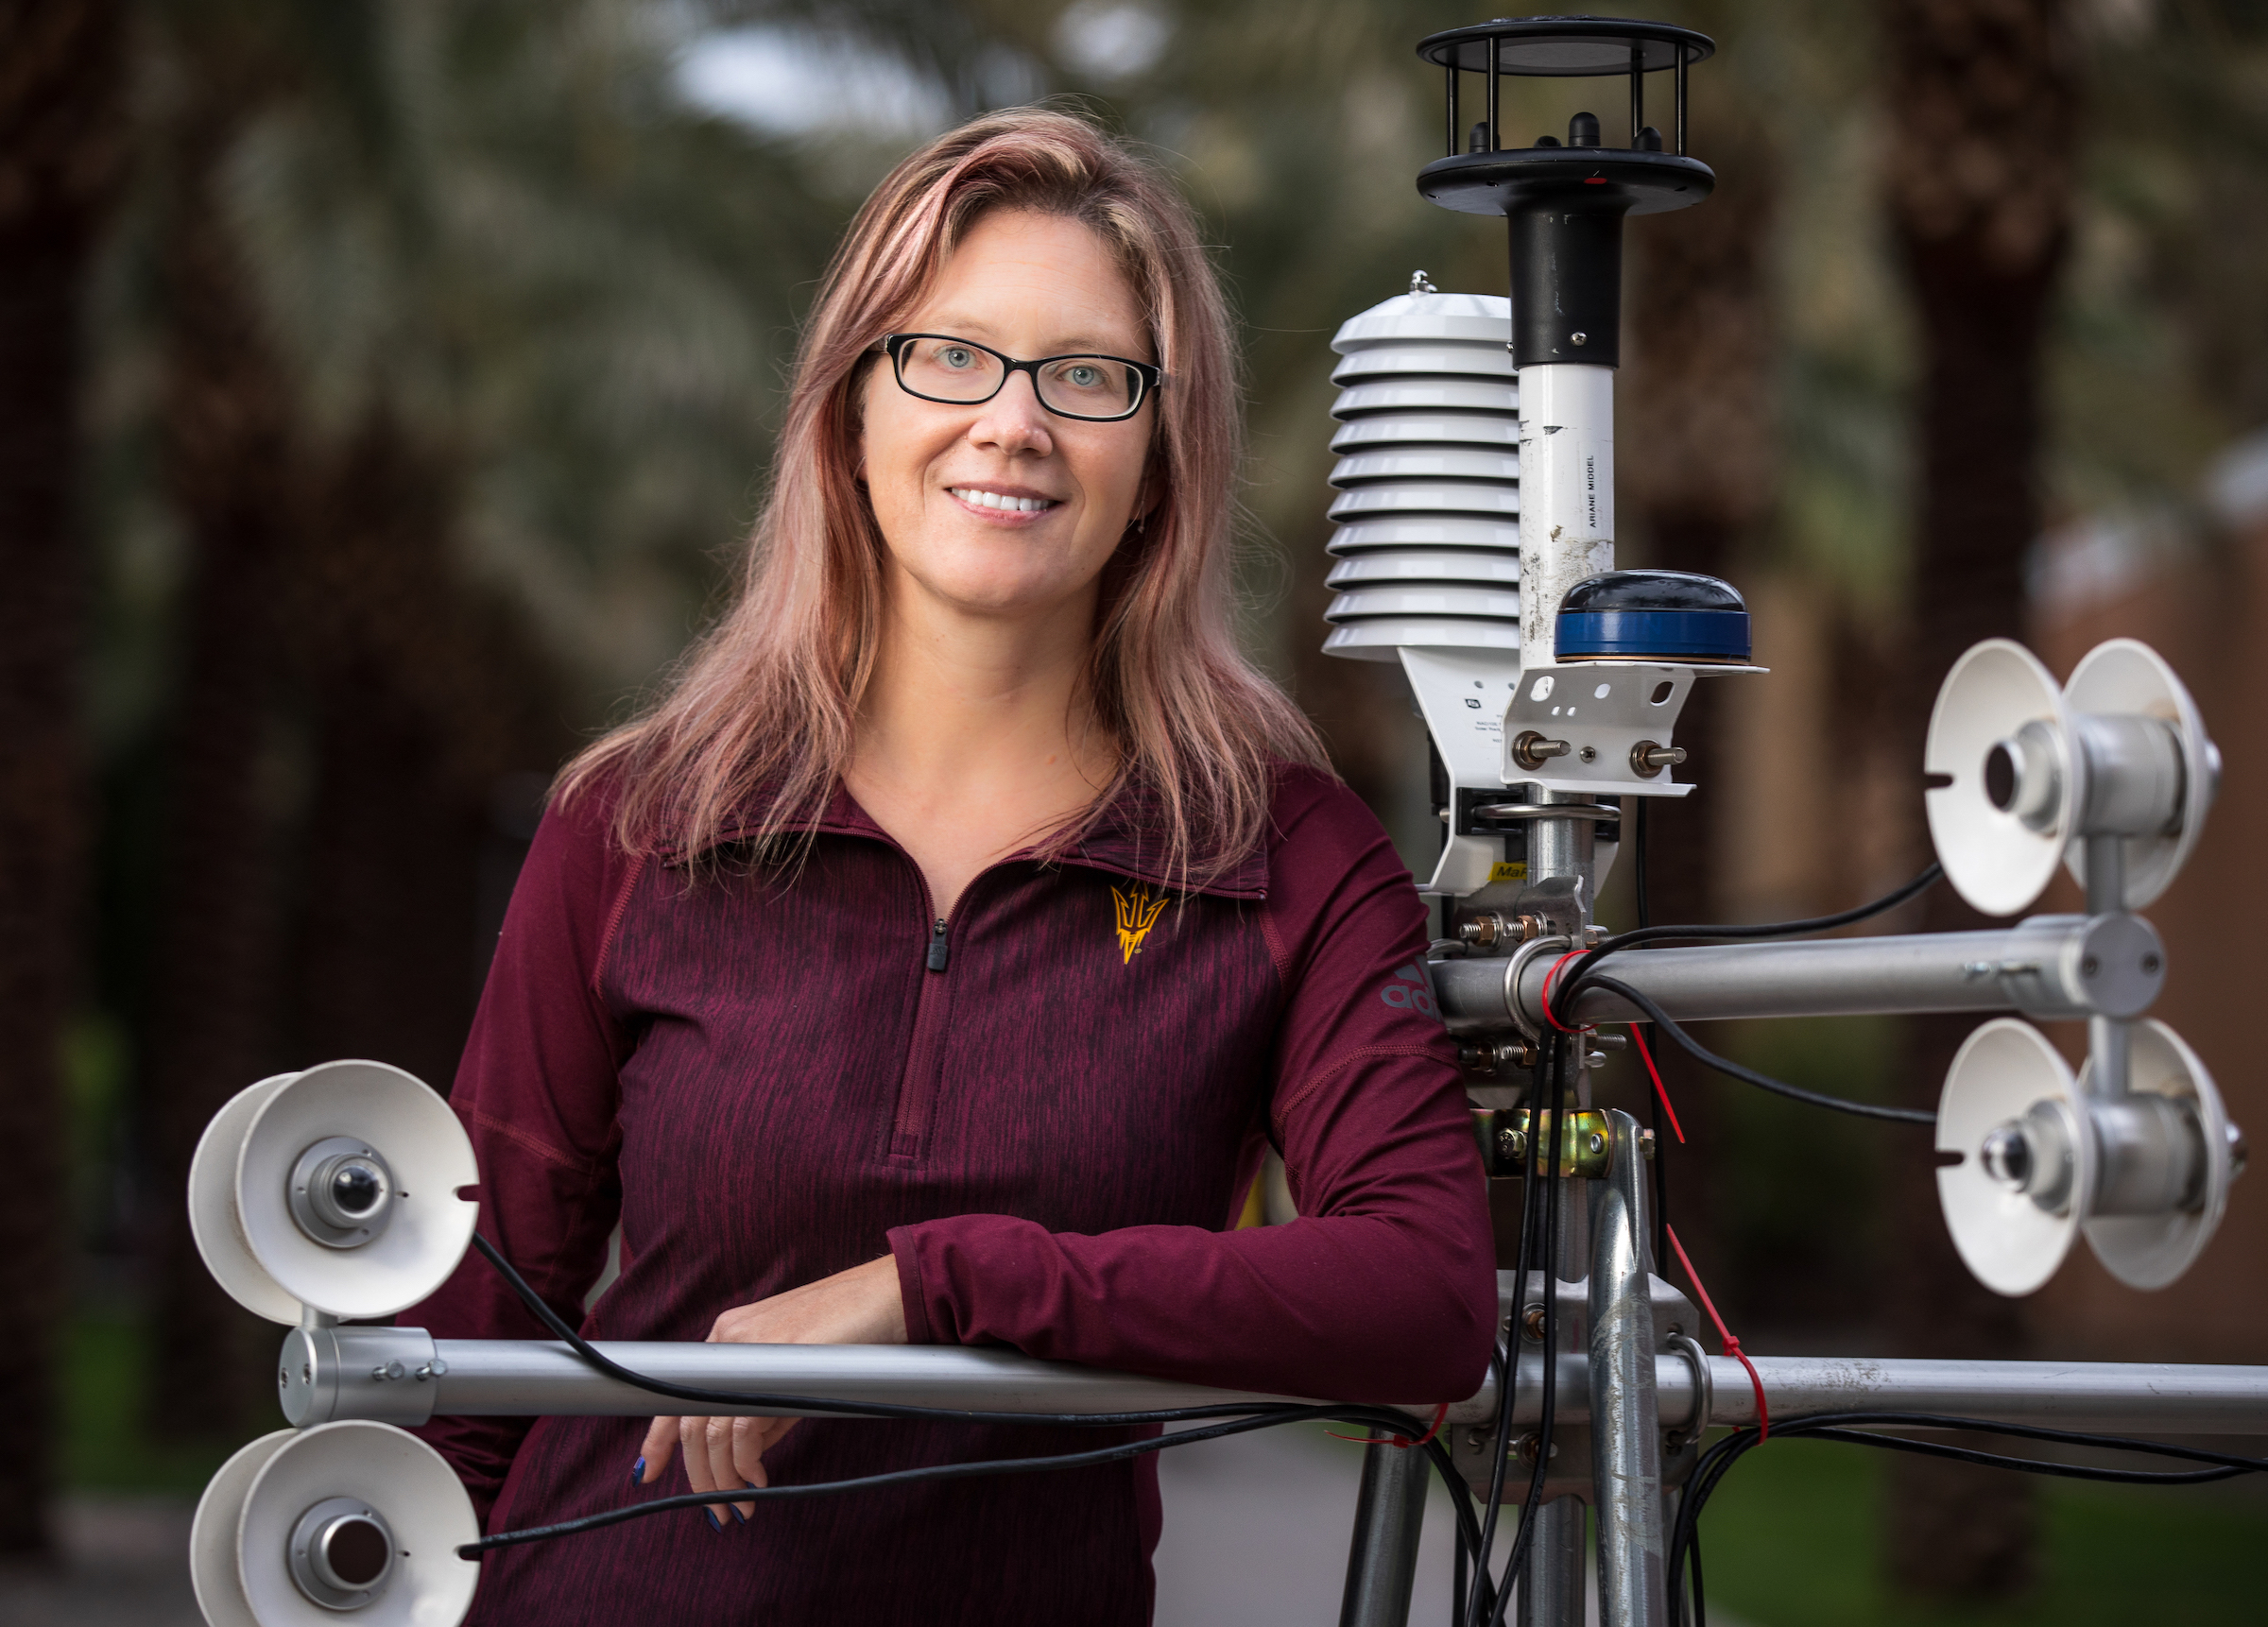 TEMPE - March 11, 2020 - ASU Now - Expert Ariane Middel - Assistant Professor Ariane Middel, posing with her biometerological MaRTy cart, focuses her research in the interdisciplinary field of urban climate with focus on climate-sensitive urban form, design, landscapes, and infrastructure in the face of extreme heat and climatic uncertainty. For the past six years, Middel has advanced the field of urban climate science through applied and solutions-oriented research employing quantitative and qualitative field observations, local and microscale climate modeling, and geovisualization to investigate sustainability challenges related to heat, thermal comfort, Urban Heat Islands, water use, energy use, and human-climate interactions in cities. Photo by Charlie Leight/ASU Now